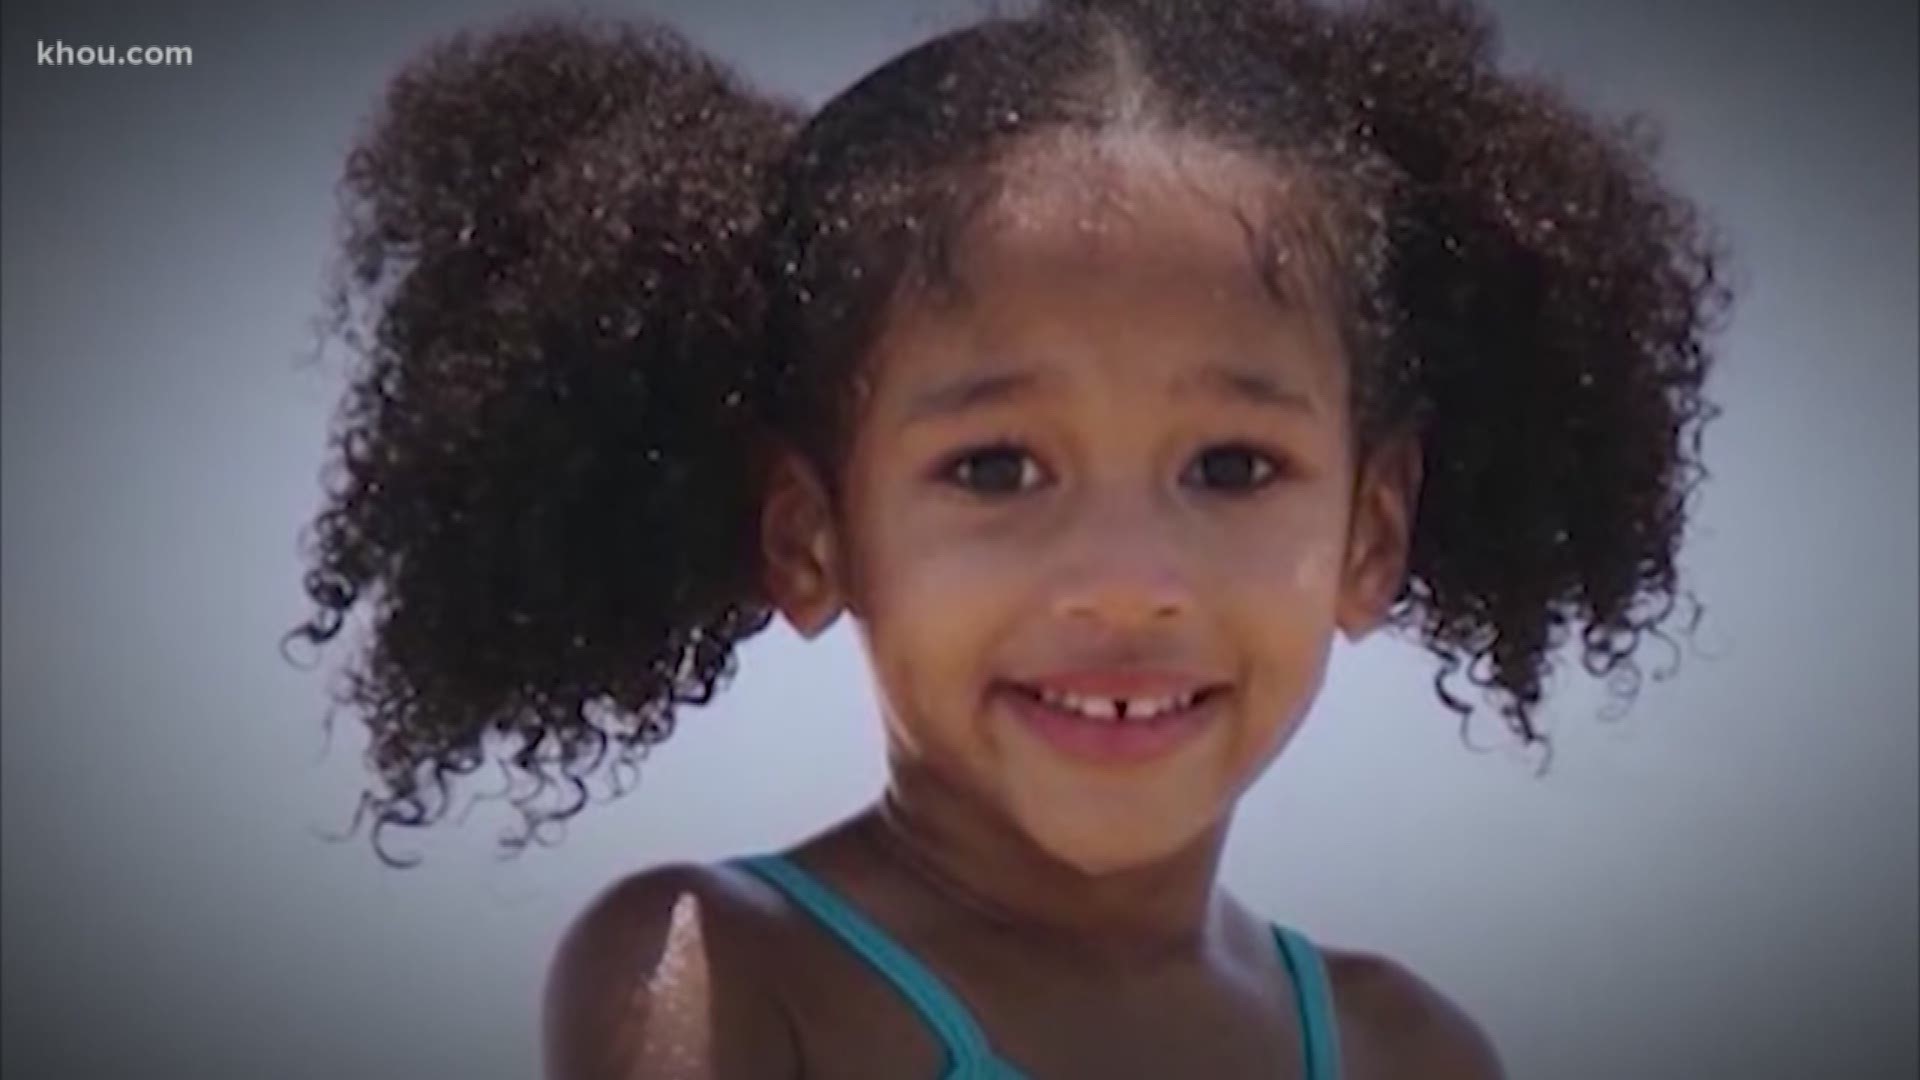 Less than a week after she was laid to rest, autopsy results confirmed Maleah Davis' death wasn't an accident. The medical examiner's said the 4-year-old's cause of death is homicidal violence.